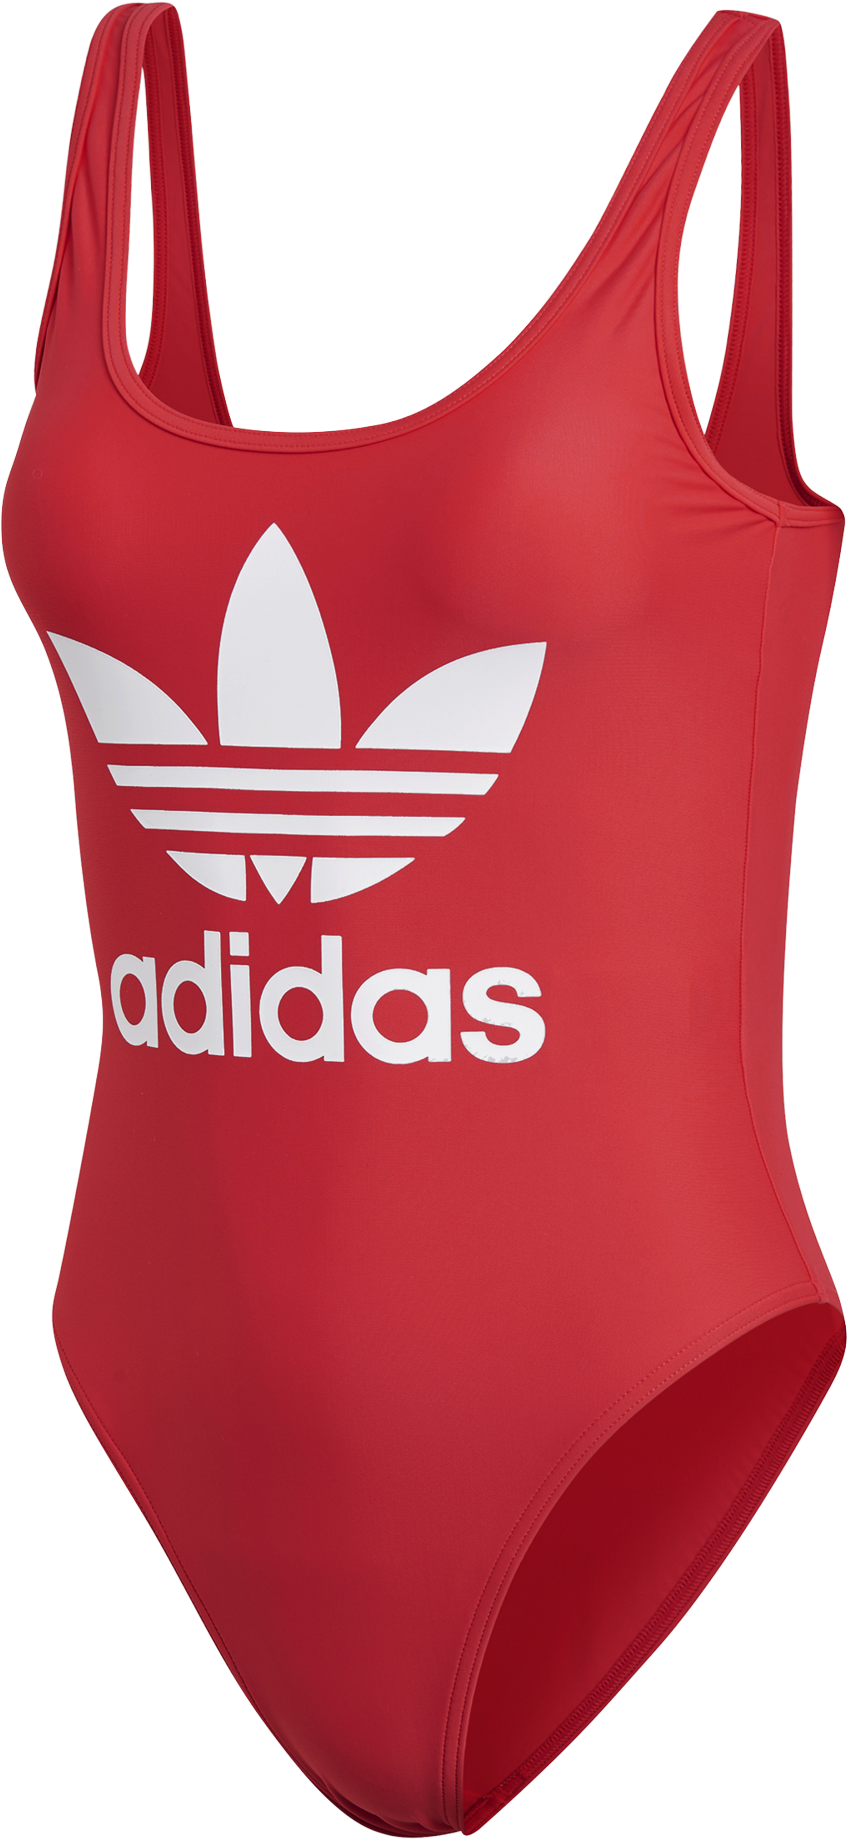 Download Adidas Original Swimsuit Red PNG Image with No Background ...